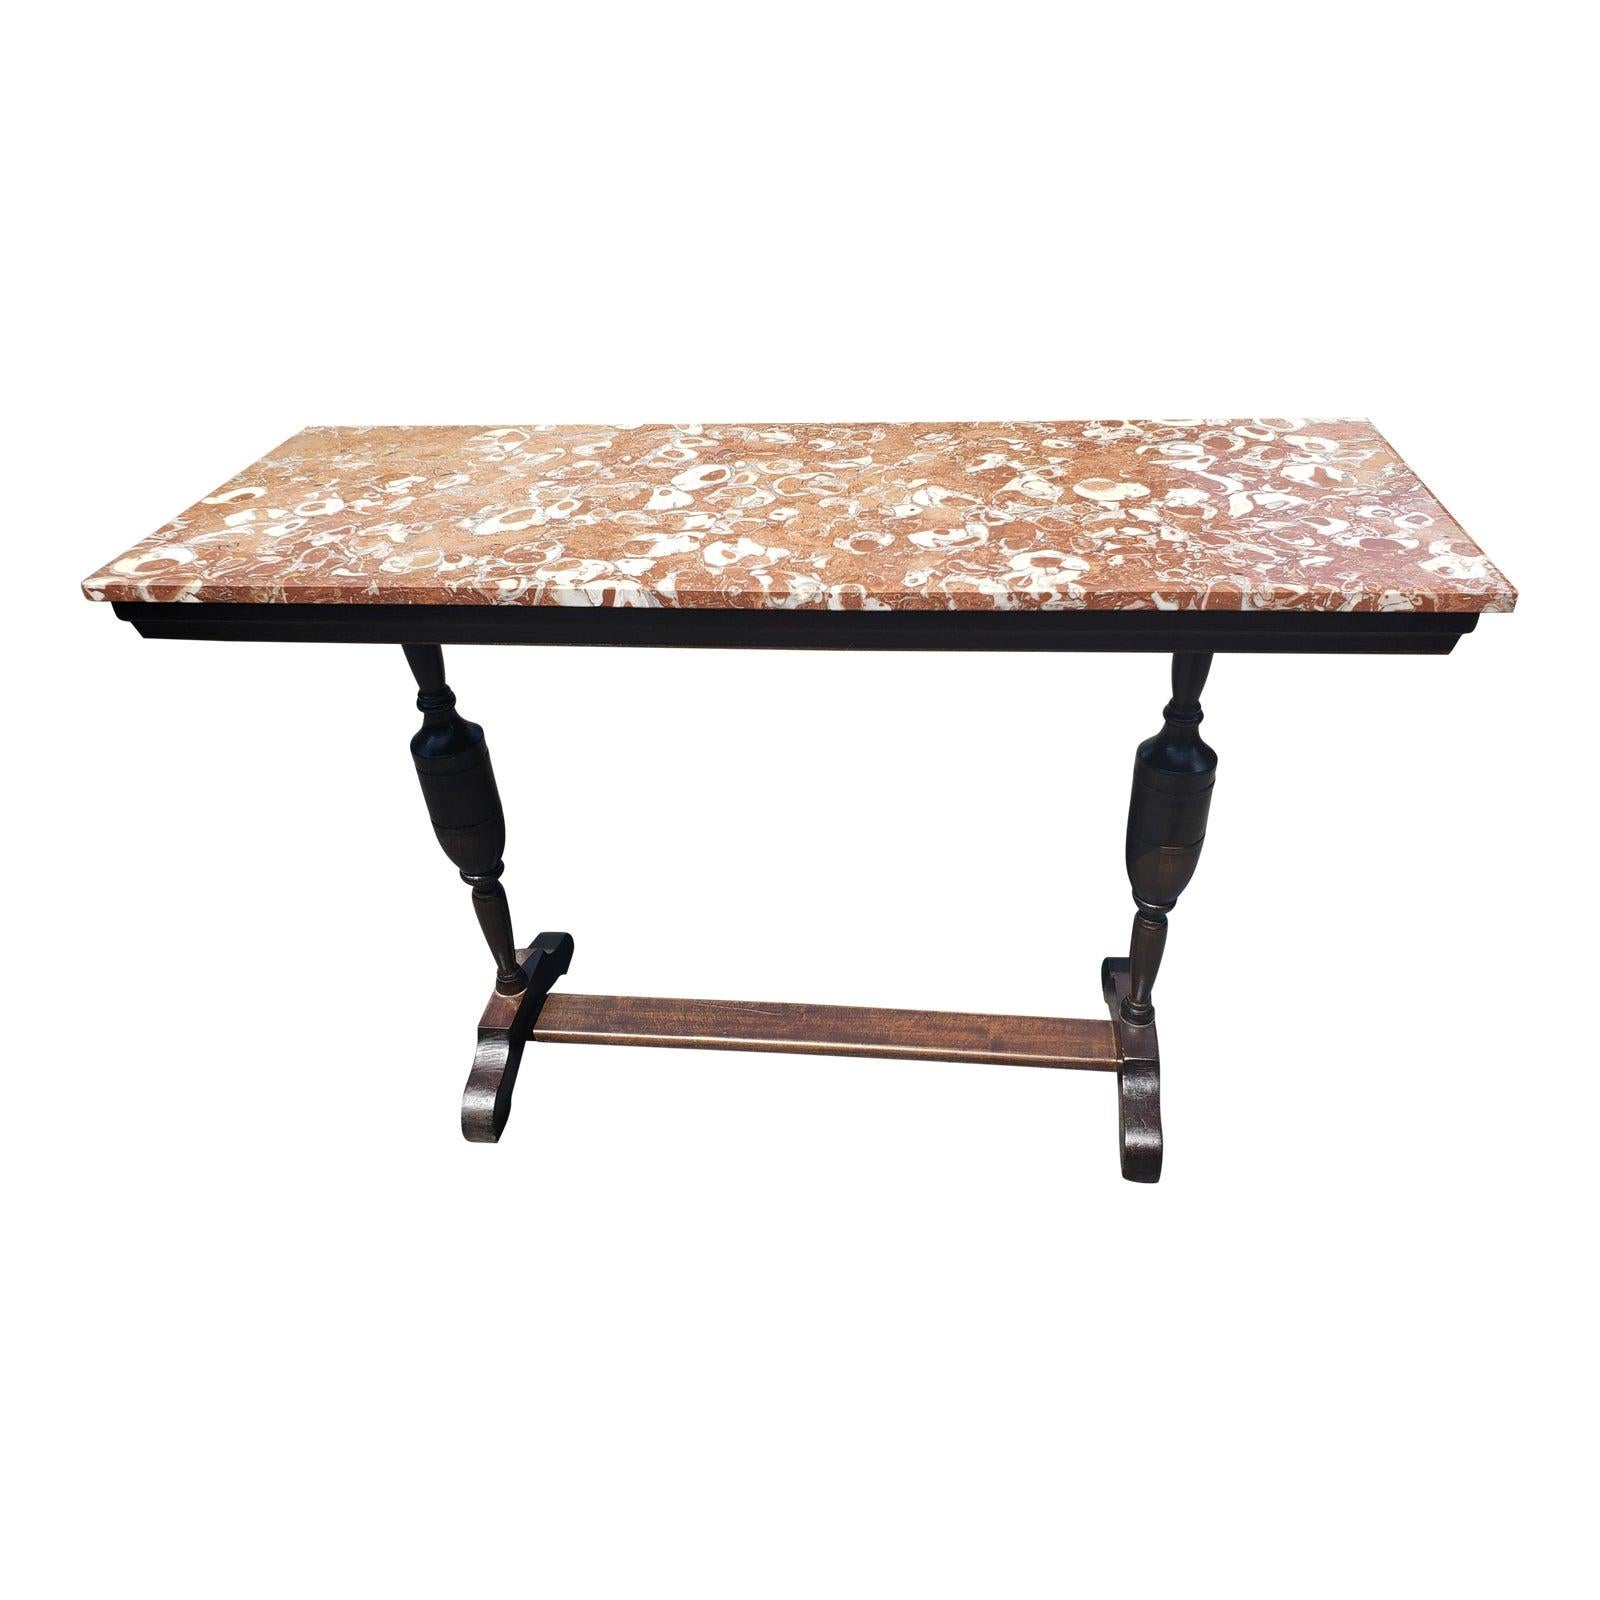 1928 King Furniture Co. Rich Marble Top and Solid Walnut Pedestal Base Console For Sale